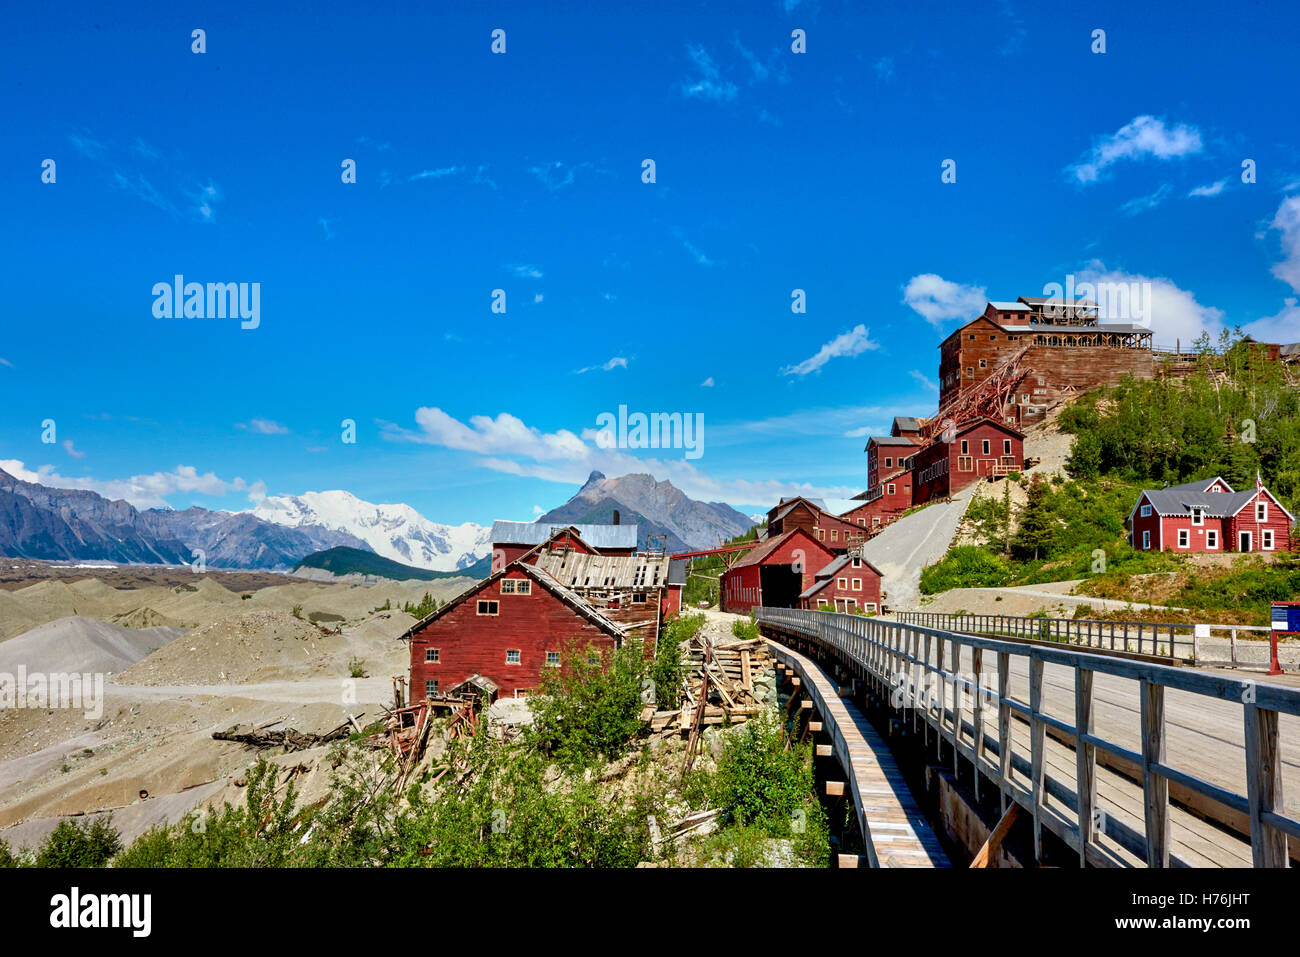 Kennecott Mining Camp in Wrangell St. Elias with Mt. Donoho in the background Stock Photo